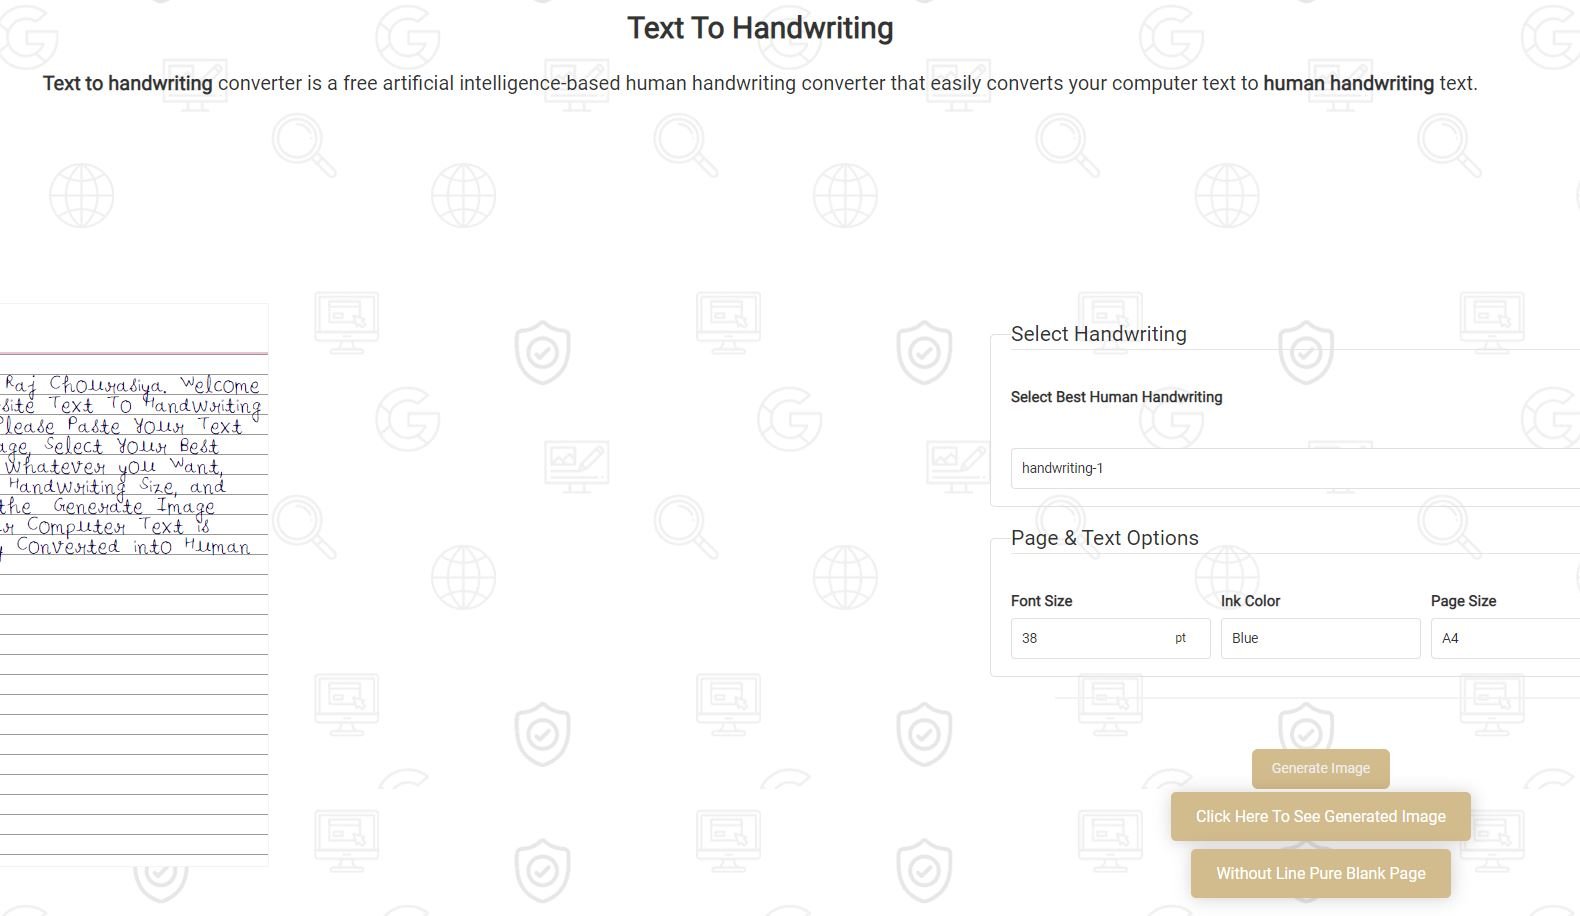 Text to Handwriting is an intriguing AI-generated website